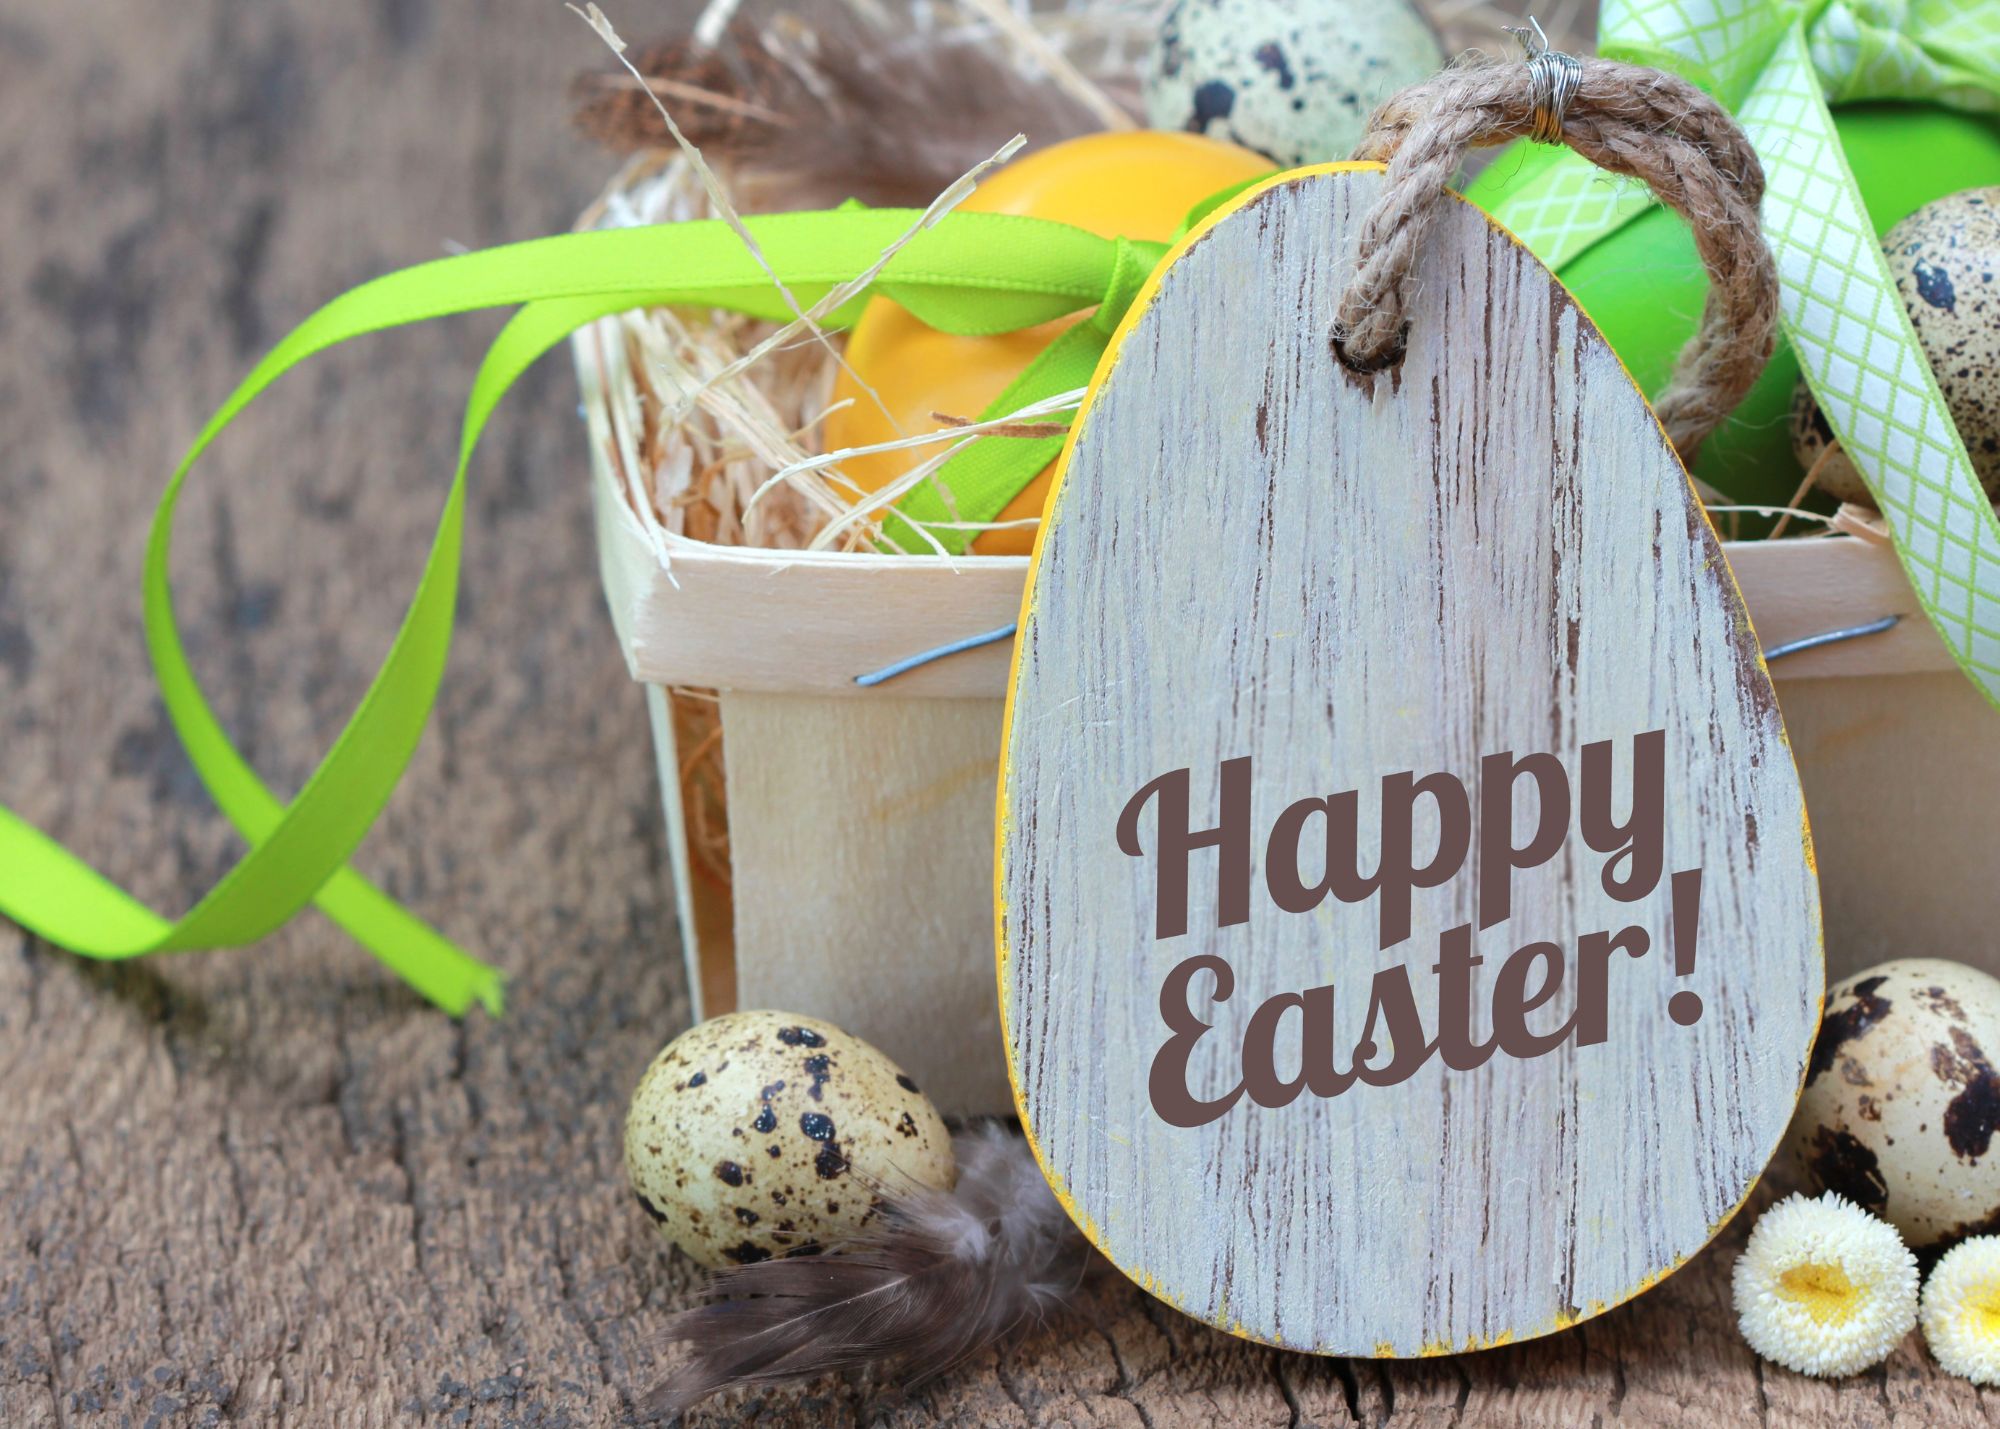 Basket with colorful eggs and a wooden egg that say Happy Easter in brown writing